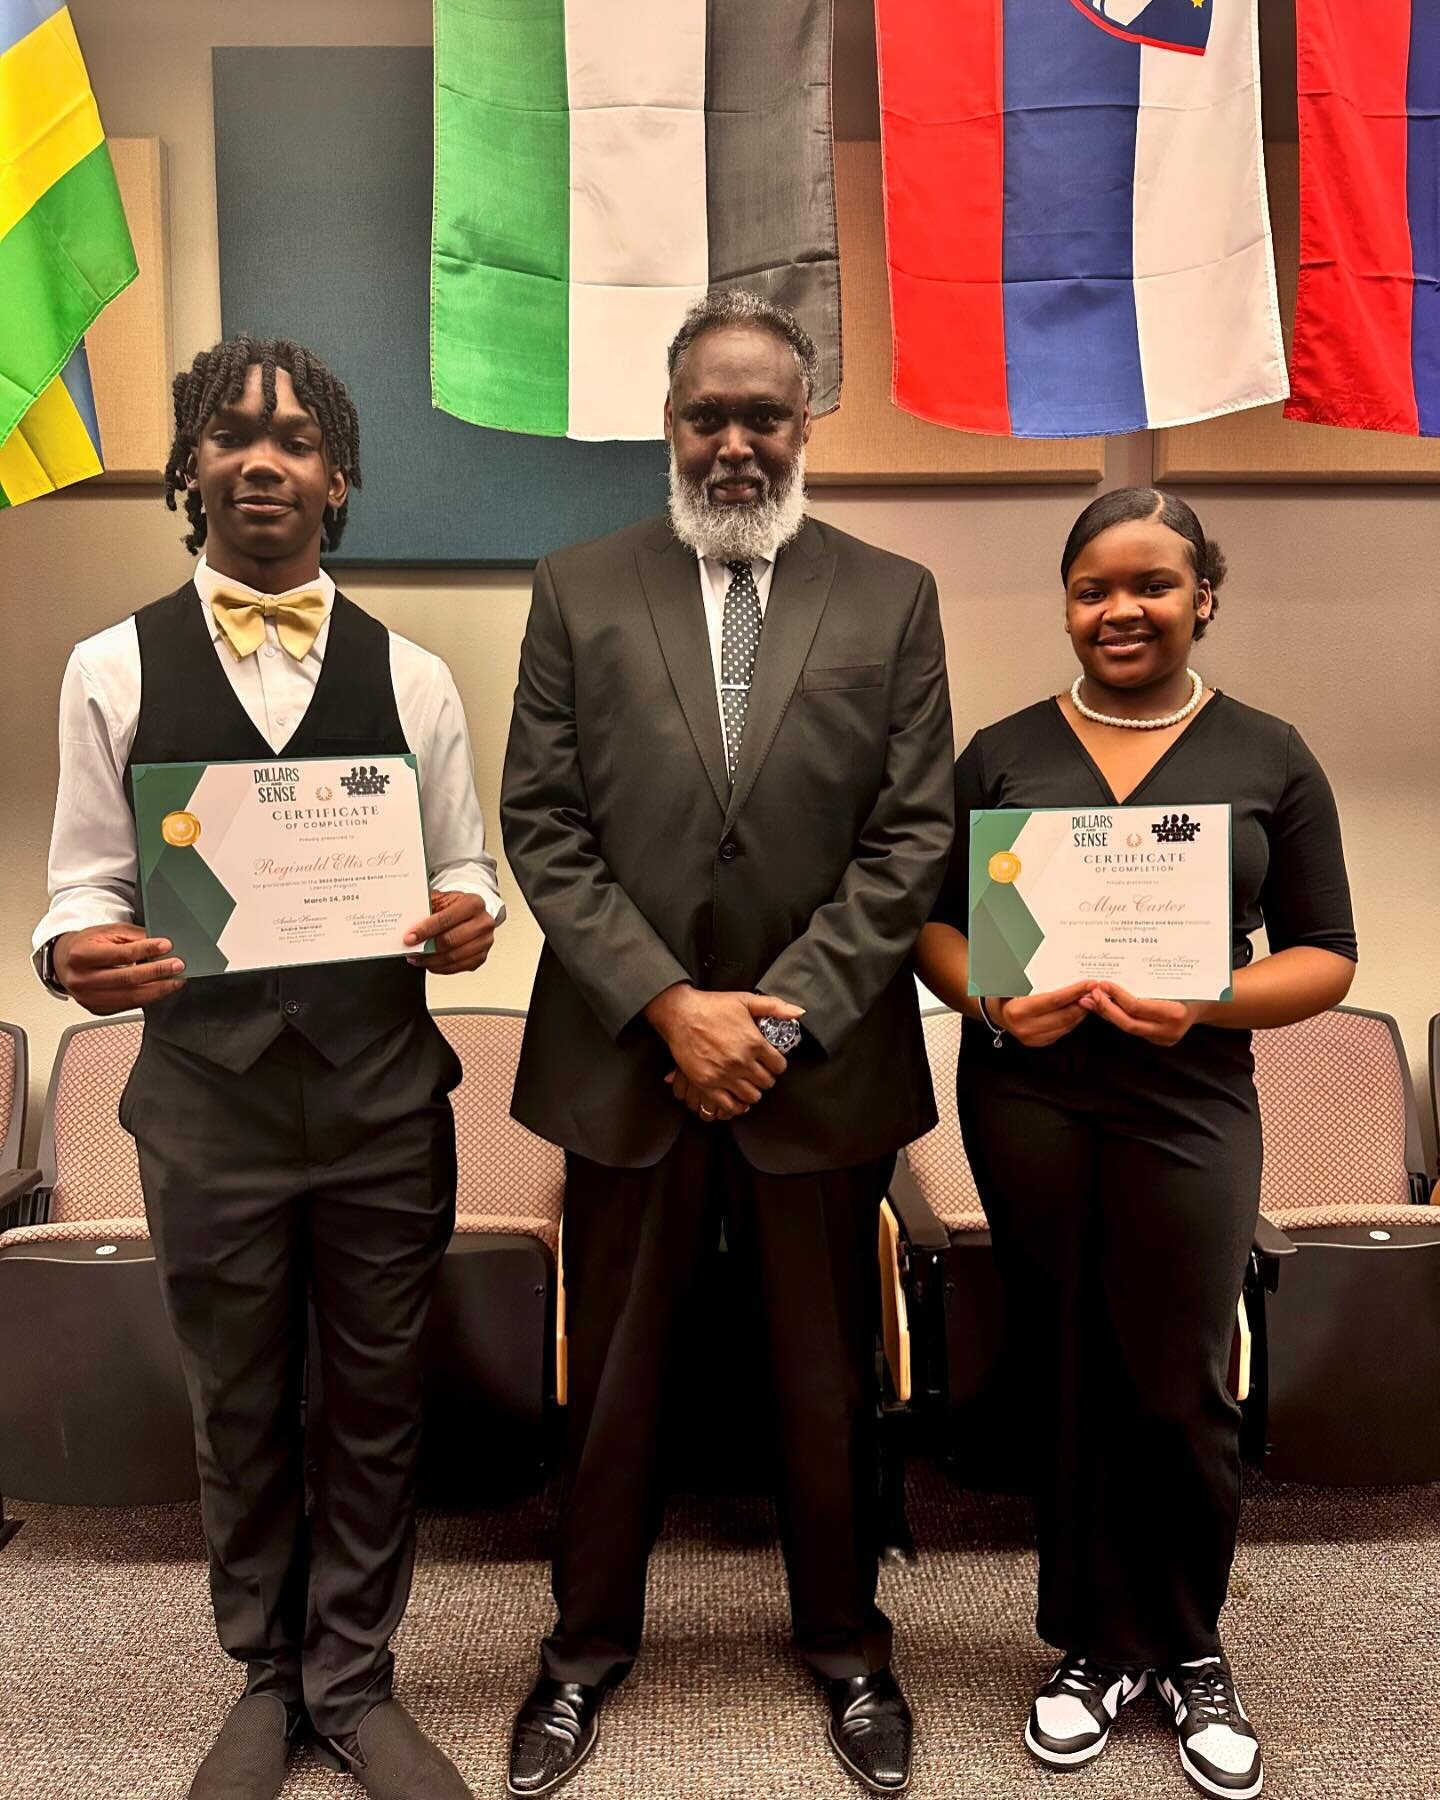 🎉🌟 Big Congratulations to Reginald and Mya from Southern University Laboratory Schoolfor successfully completing the Dollars and Sense Program with 100 Black Men of Metro Baton Rouge, Ltd. 🎓💼

👏🏽👏🏽 We&rsquo;re so proud of their dedication to 